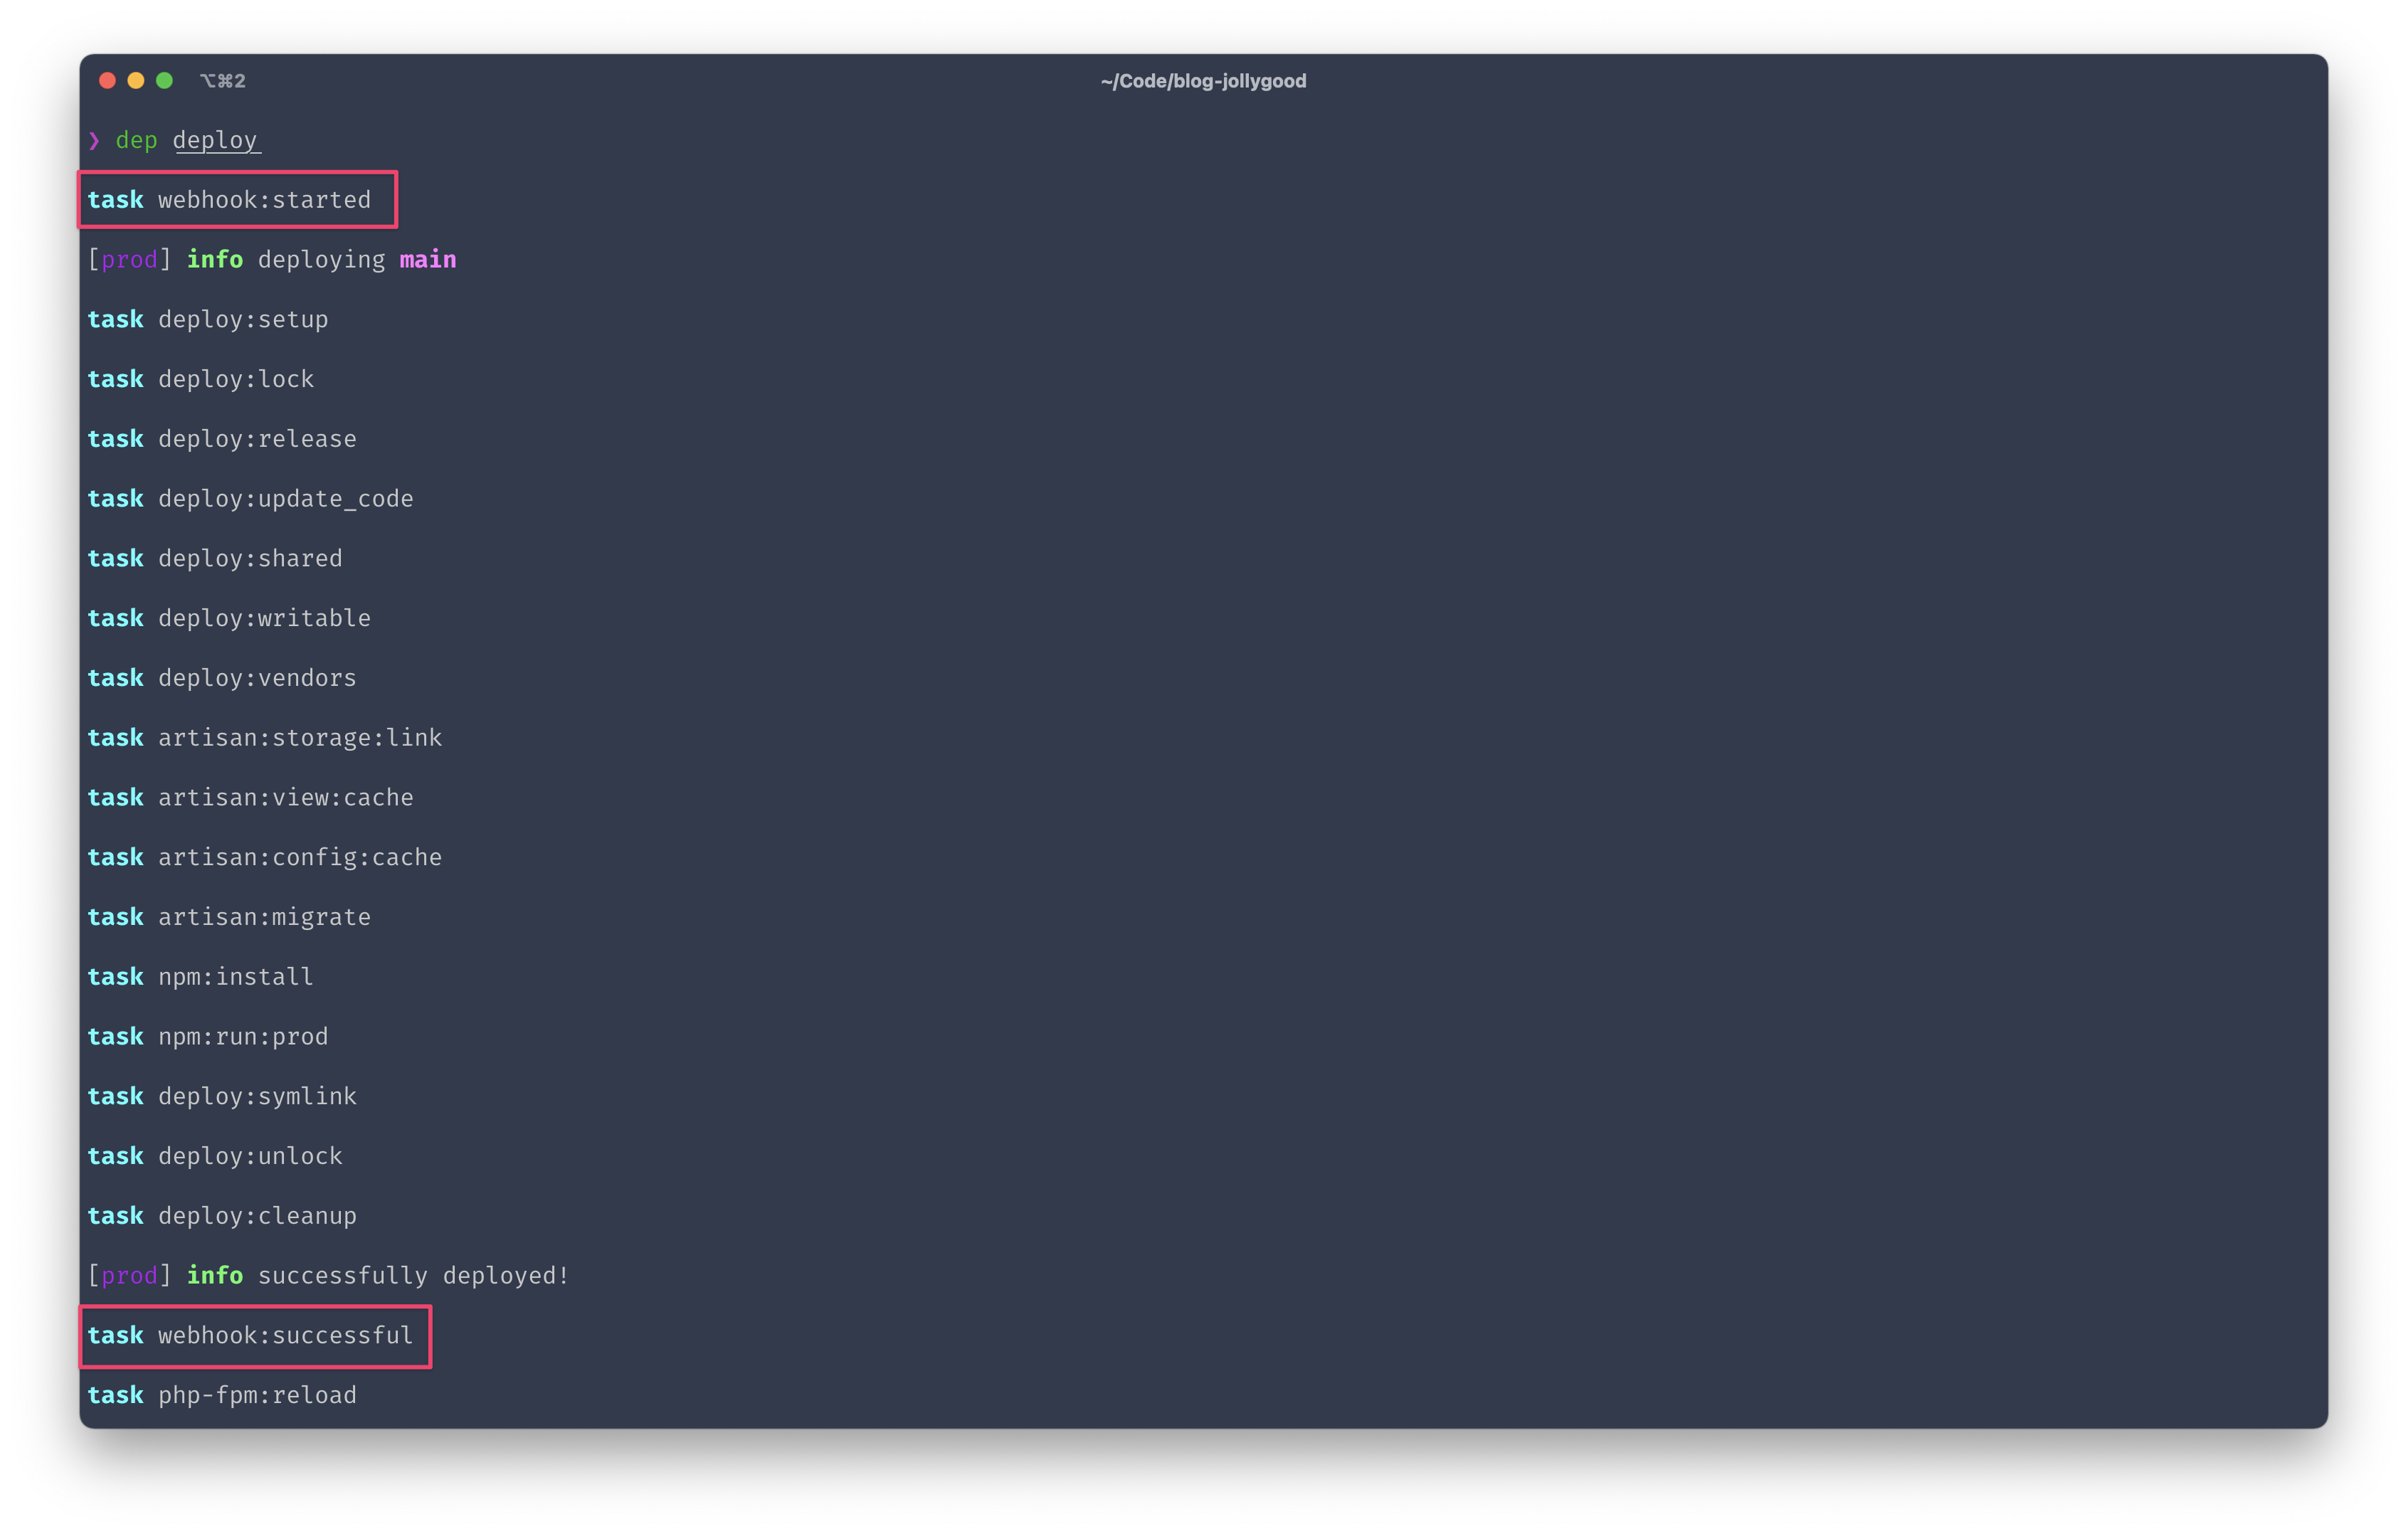 Screenshot of the terminal output for "dep deploy". It shows all our tasks including "webhook:started" and "webhook:successful", respectively at the beginning and the end of the deployment.